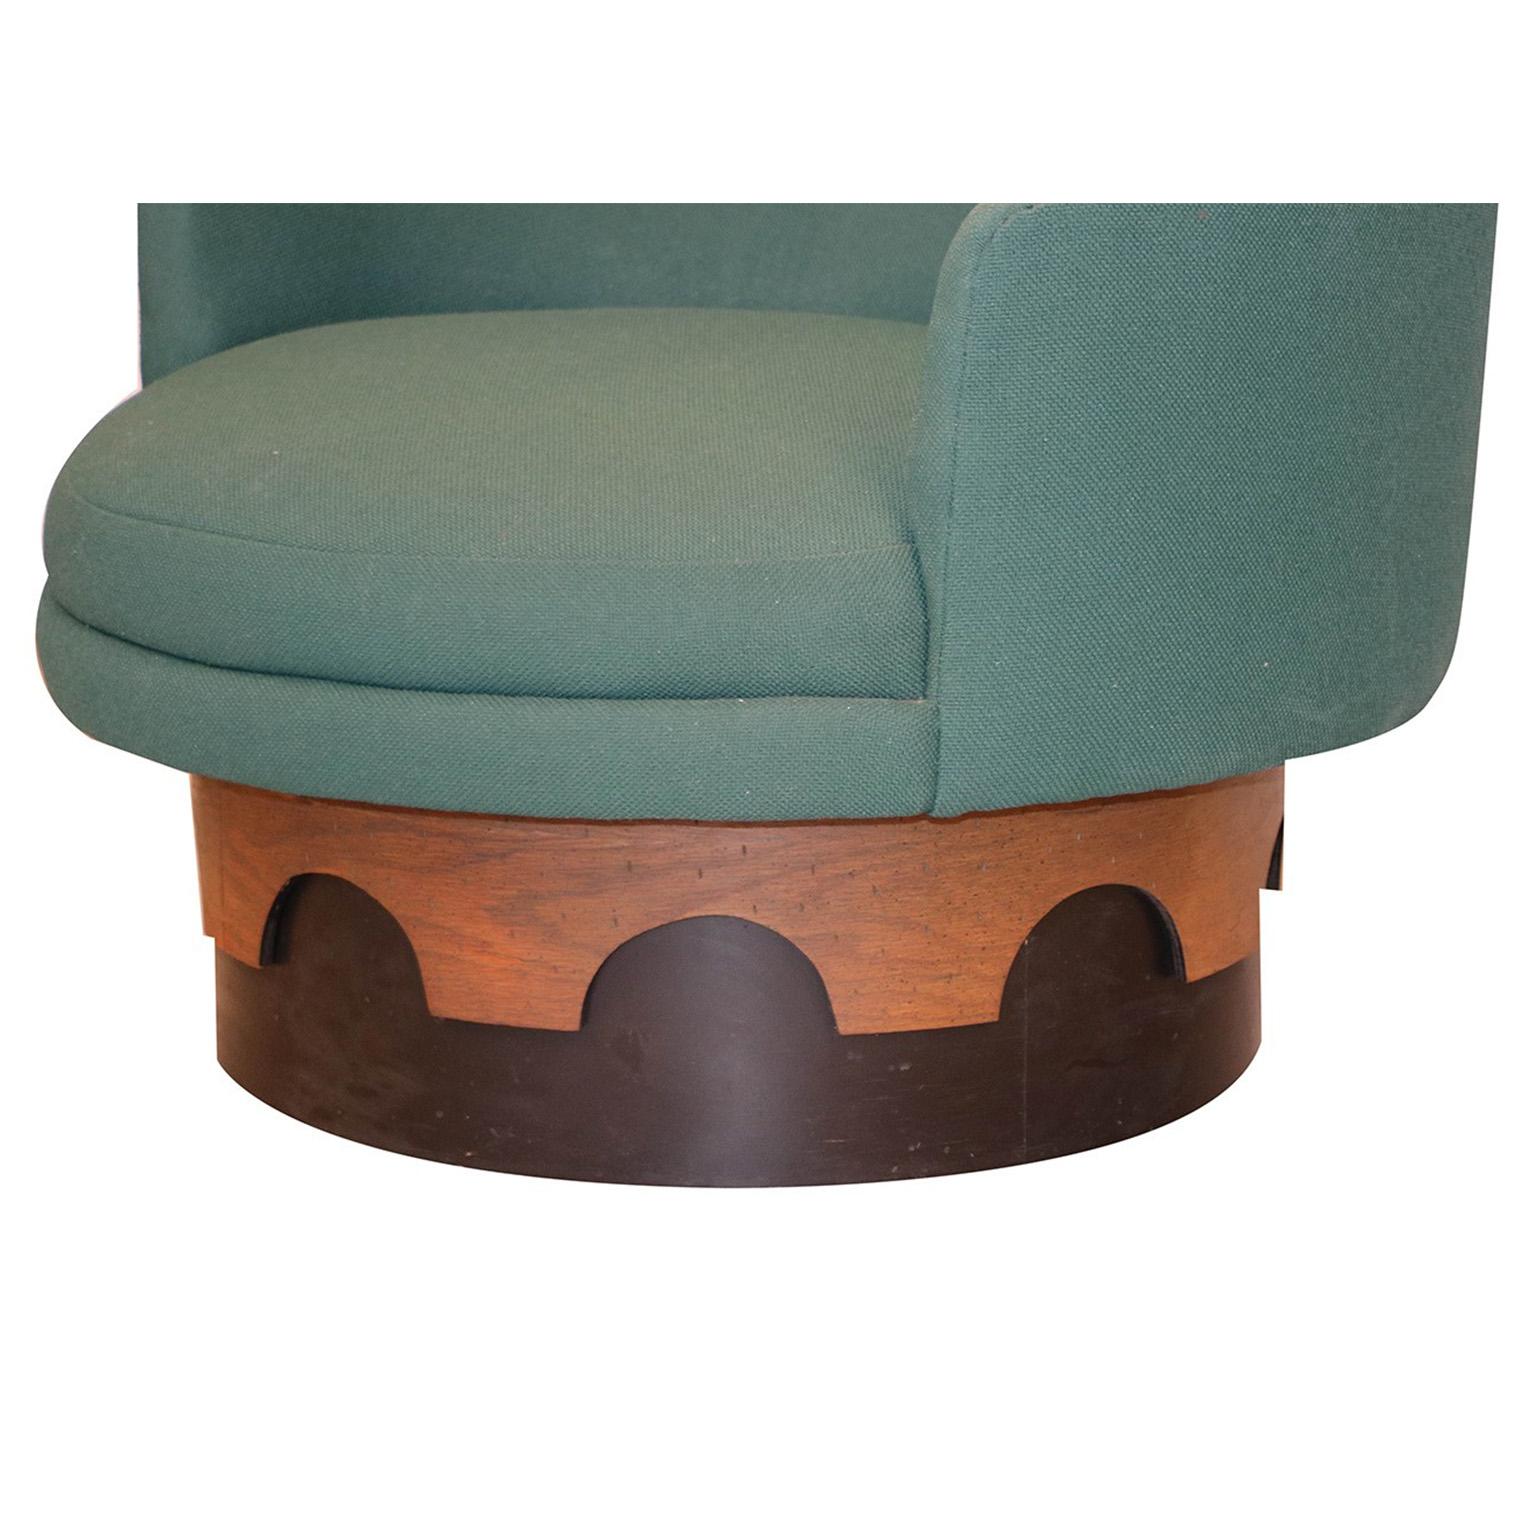 A fabulous and fun original 1960s high back swivel chair designed by Adrian Pearsall for his “Strictly Spanish” collection for Craft Associates. An icon of Pearsall’s flamboyant “Atomic Age”, this unique chair features original teal green wool tweed